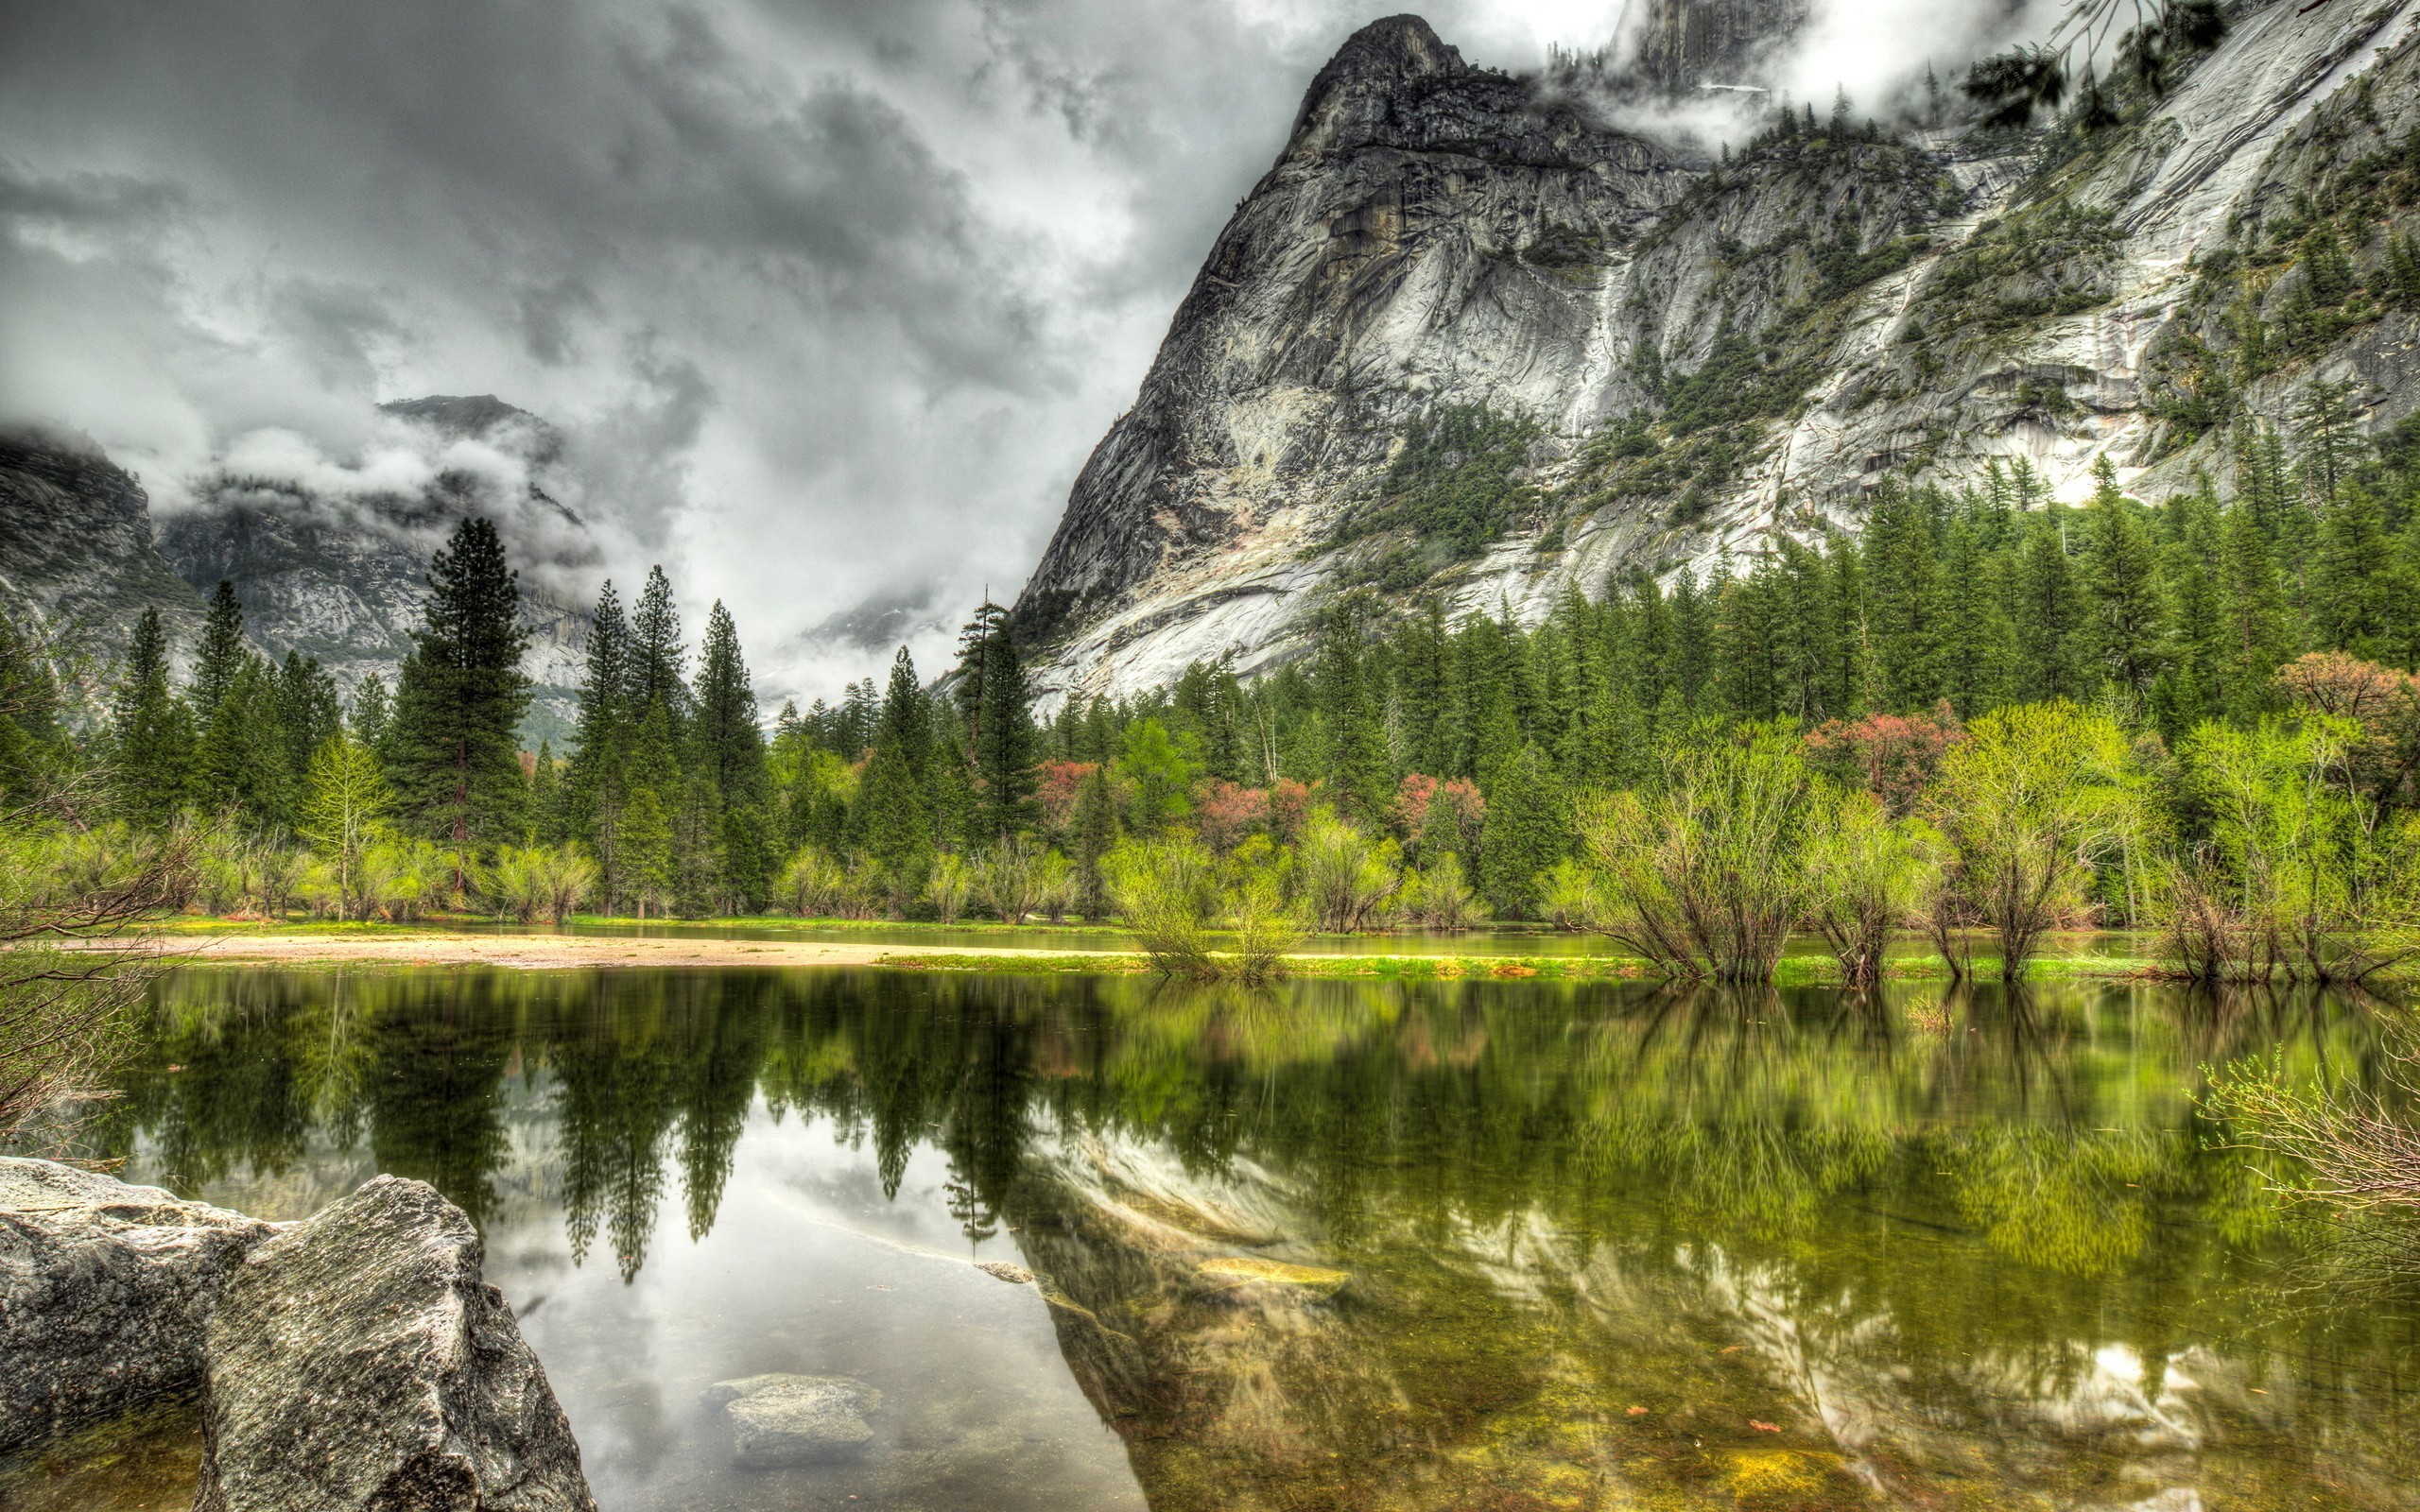 General 2560x1600 nature HDR landscape lake mountains trees clouds stones reflection Yosemite National Park Half Dome